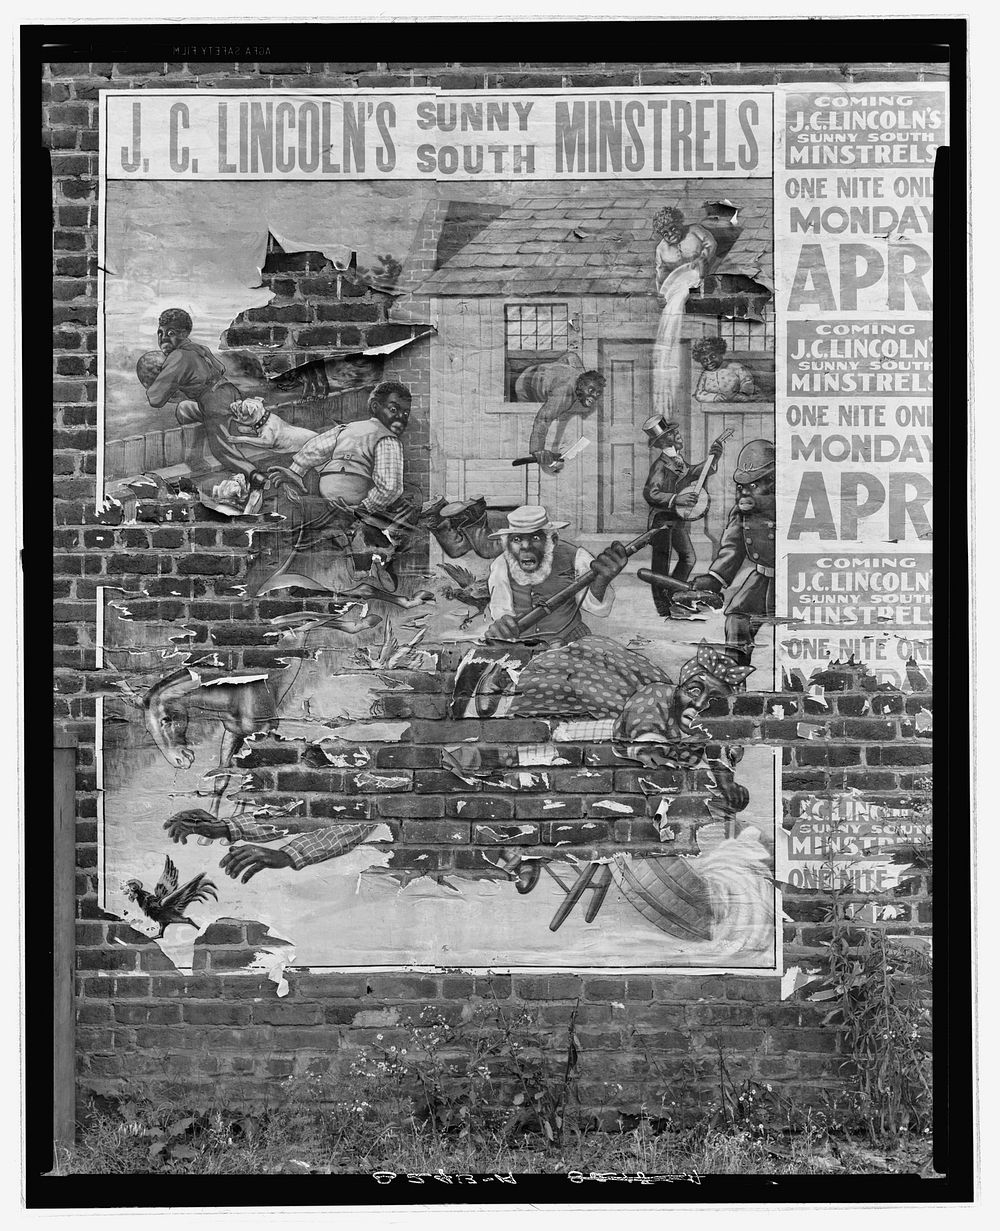 Minstrel poster. Alabama. Sourced from the Library of Congress.